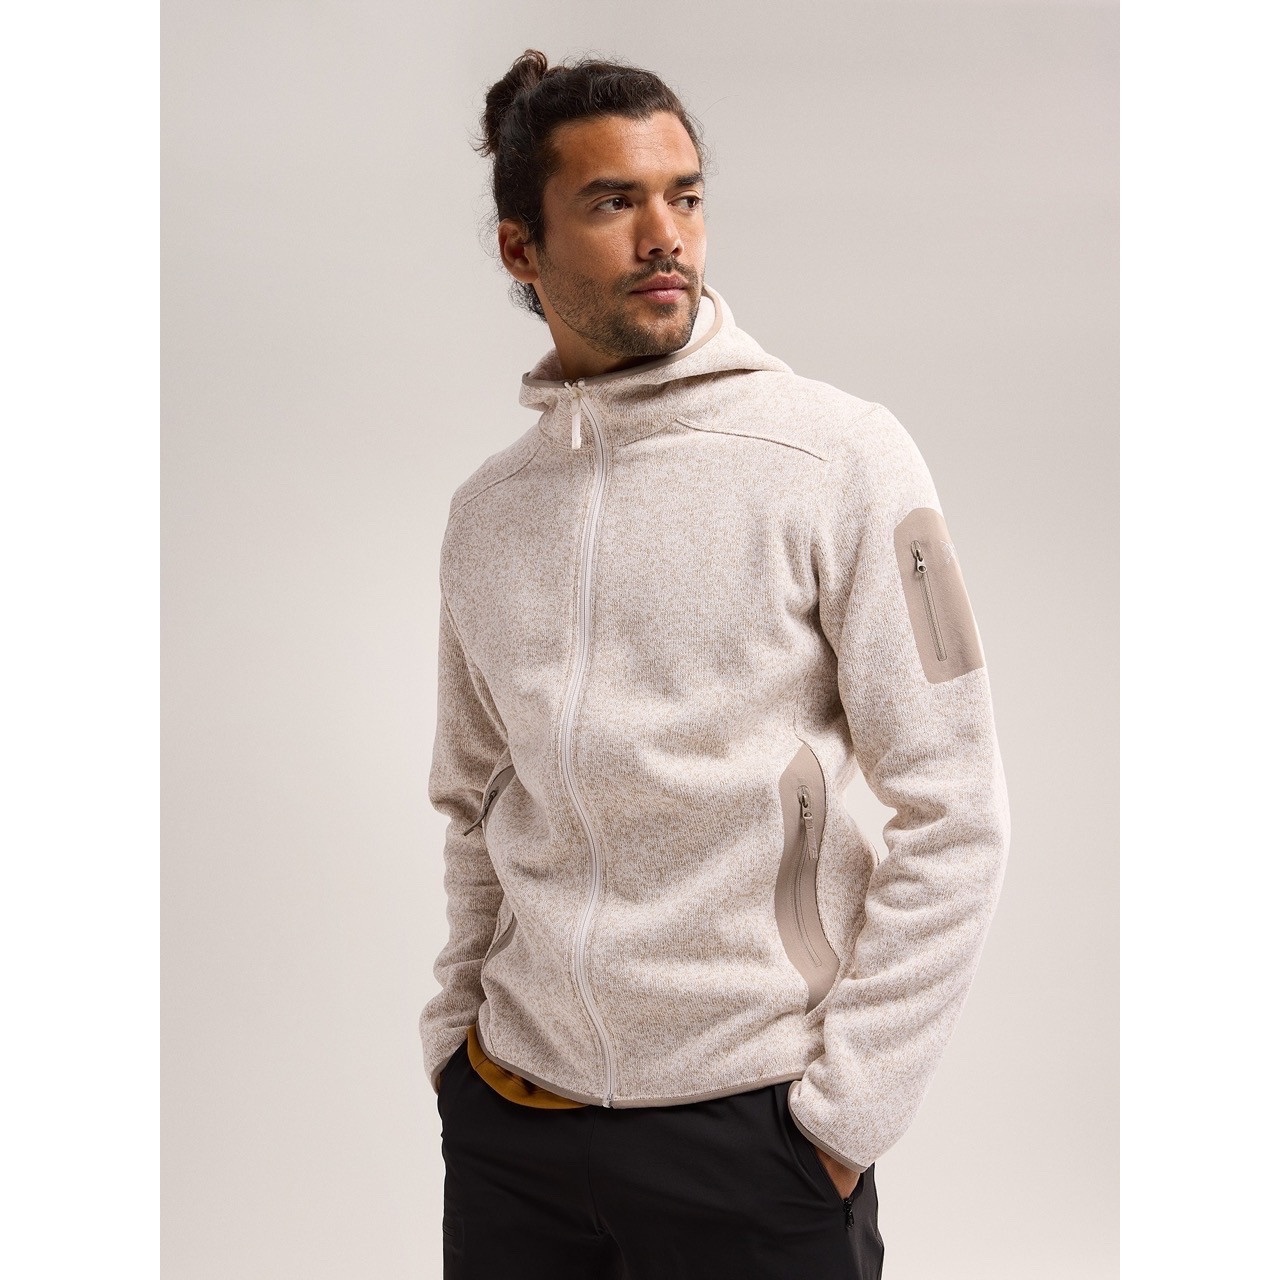 INTO THE AM Pullover Hoodies for Men - Lightweight Casual Fleece